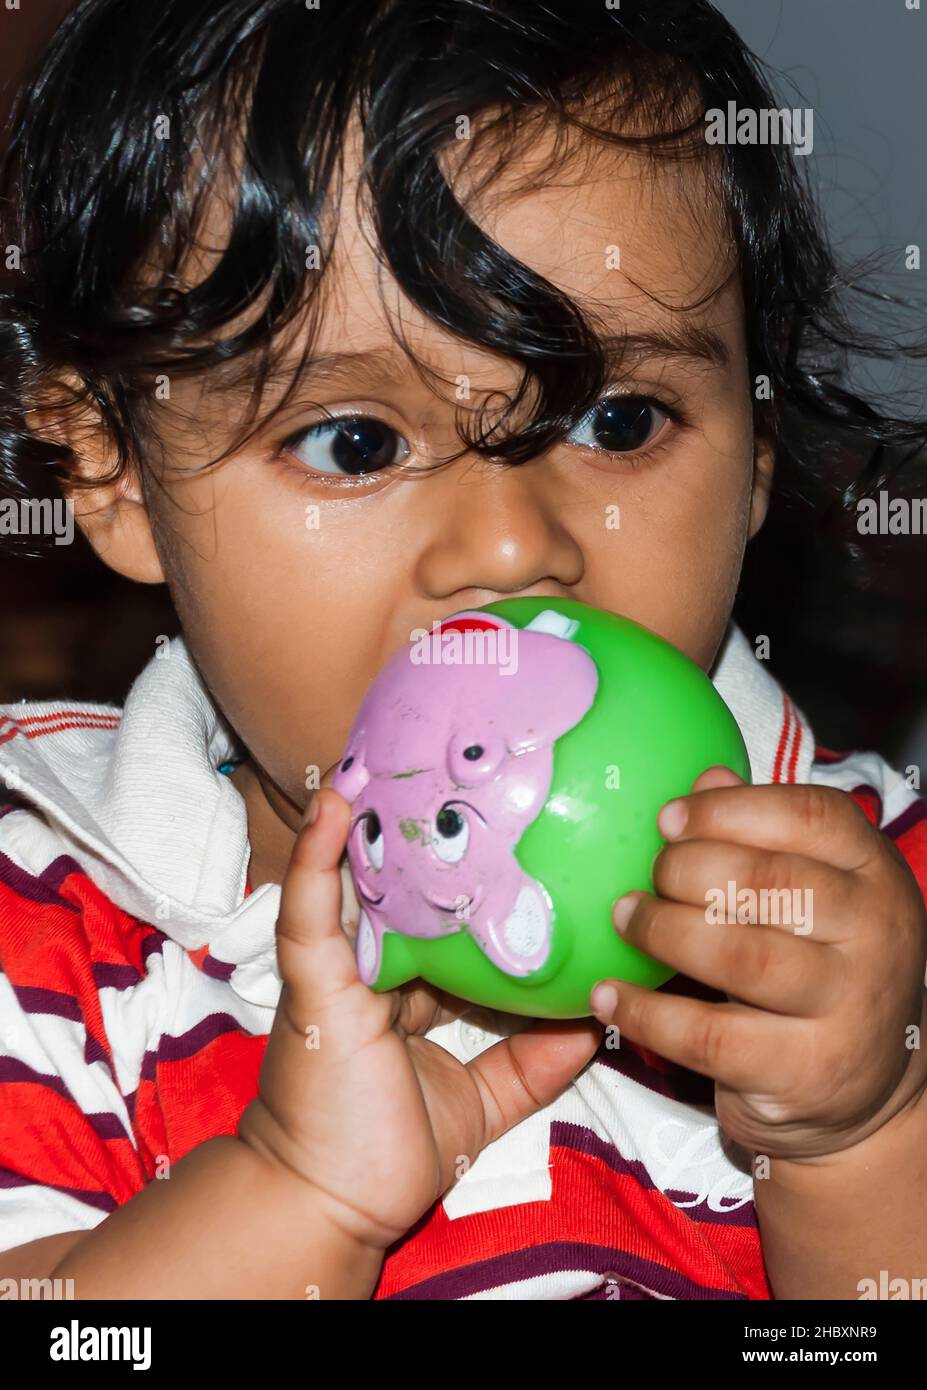 An East Indian baby boy showing signs of teething by chewing on a teething toy or a teether. Stock Photo